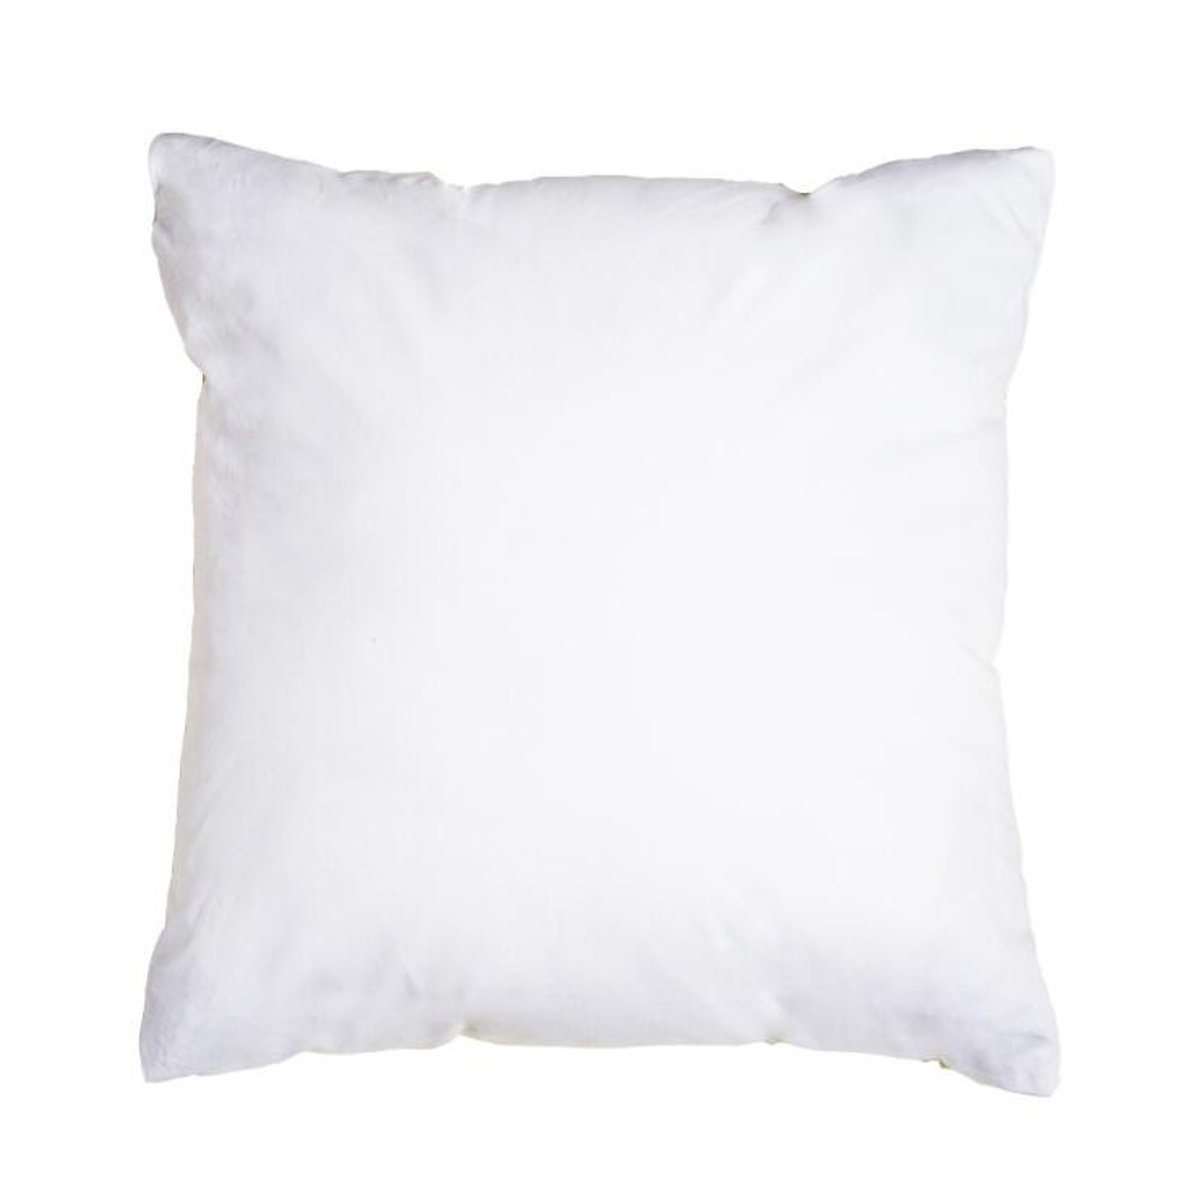 Cotton-Pillow-Case-Solid-Color-Cushion-Cover-Throw-Home-Sofa-Decoration-45X45cm-1579144-8